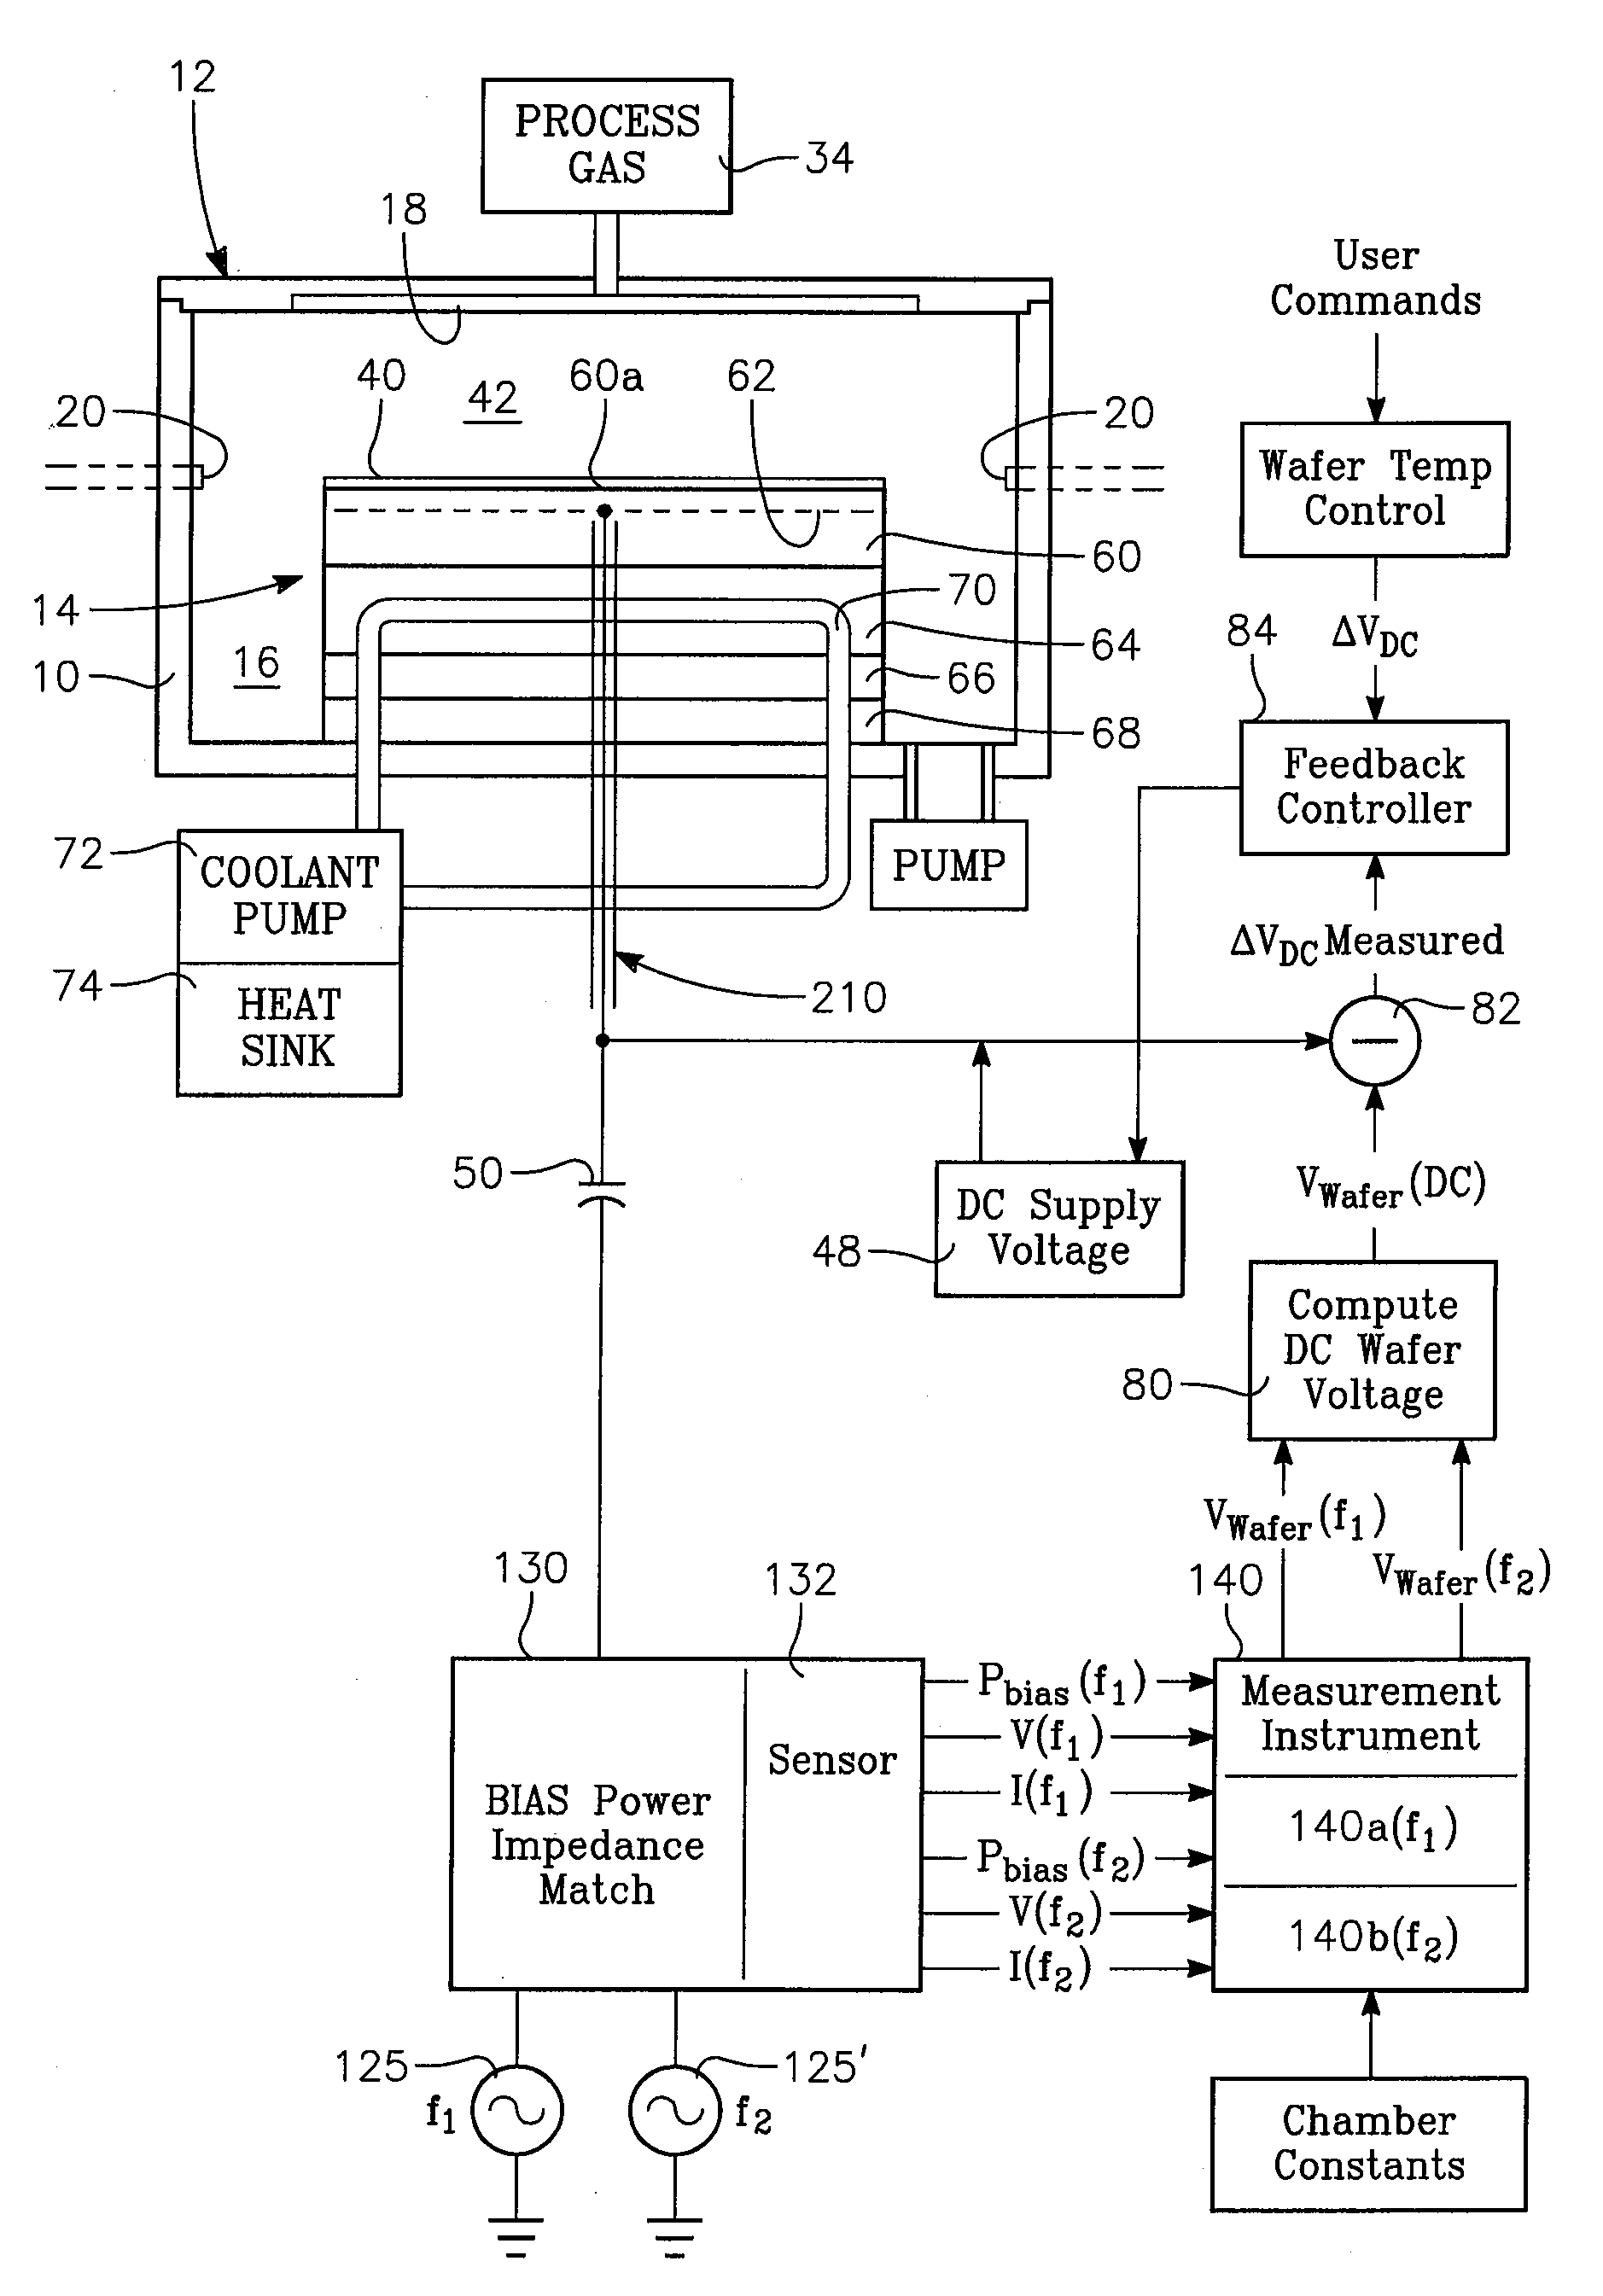 Method of feedback control of esc voltage using wafer voltage measurement at the bias supply output